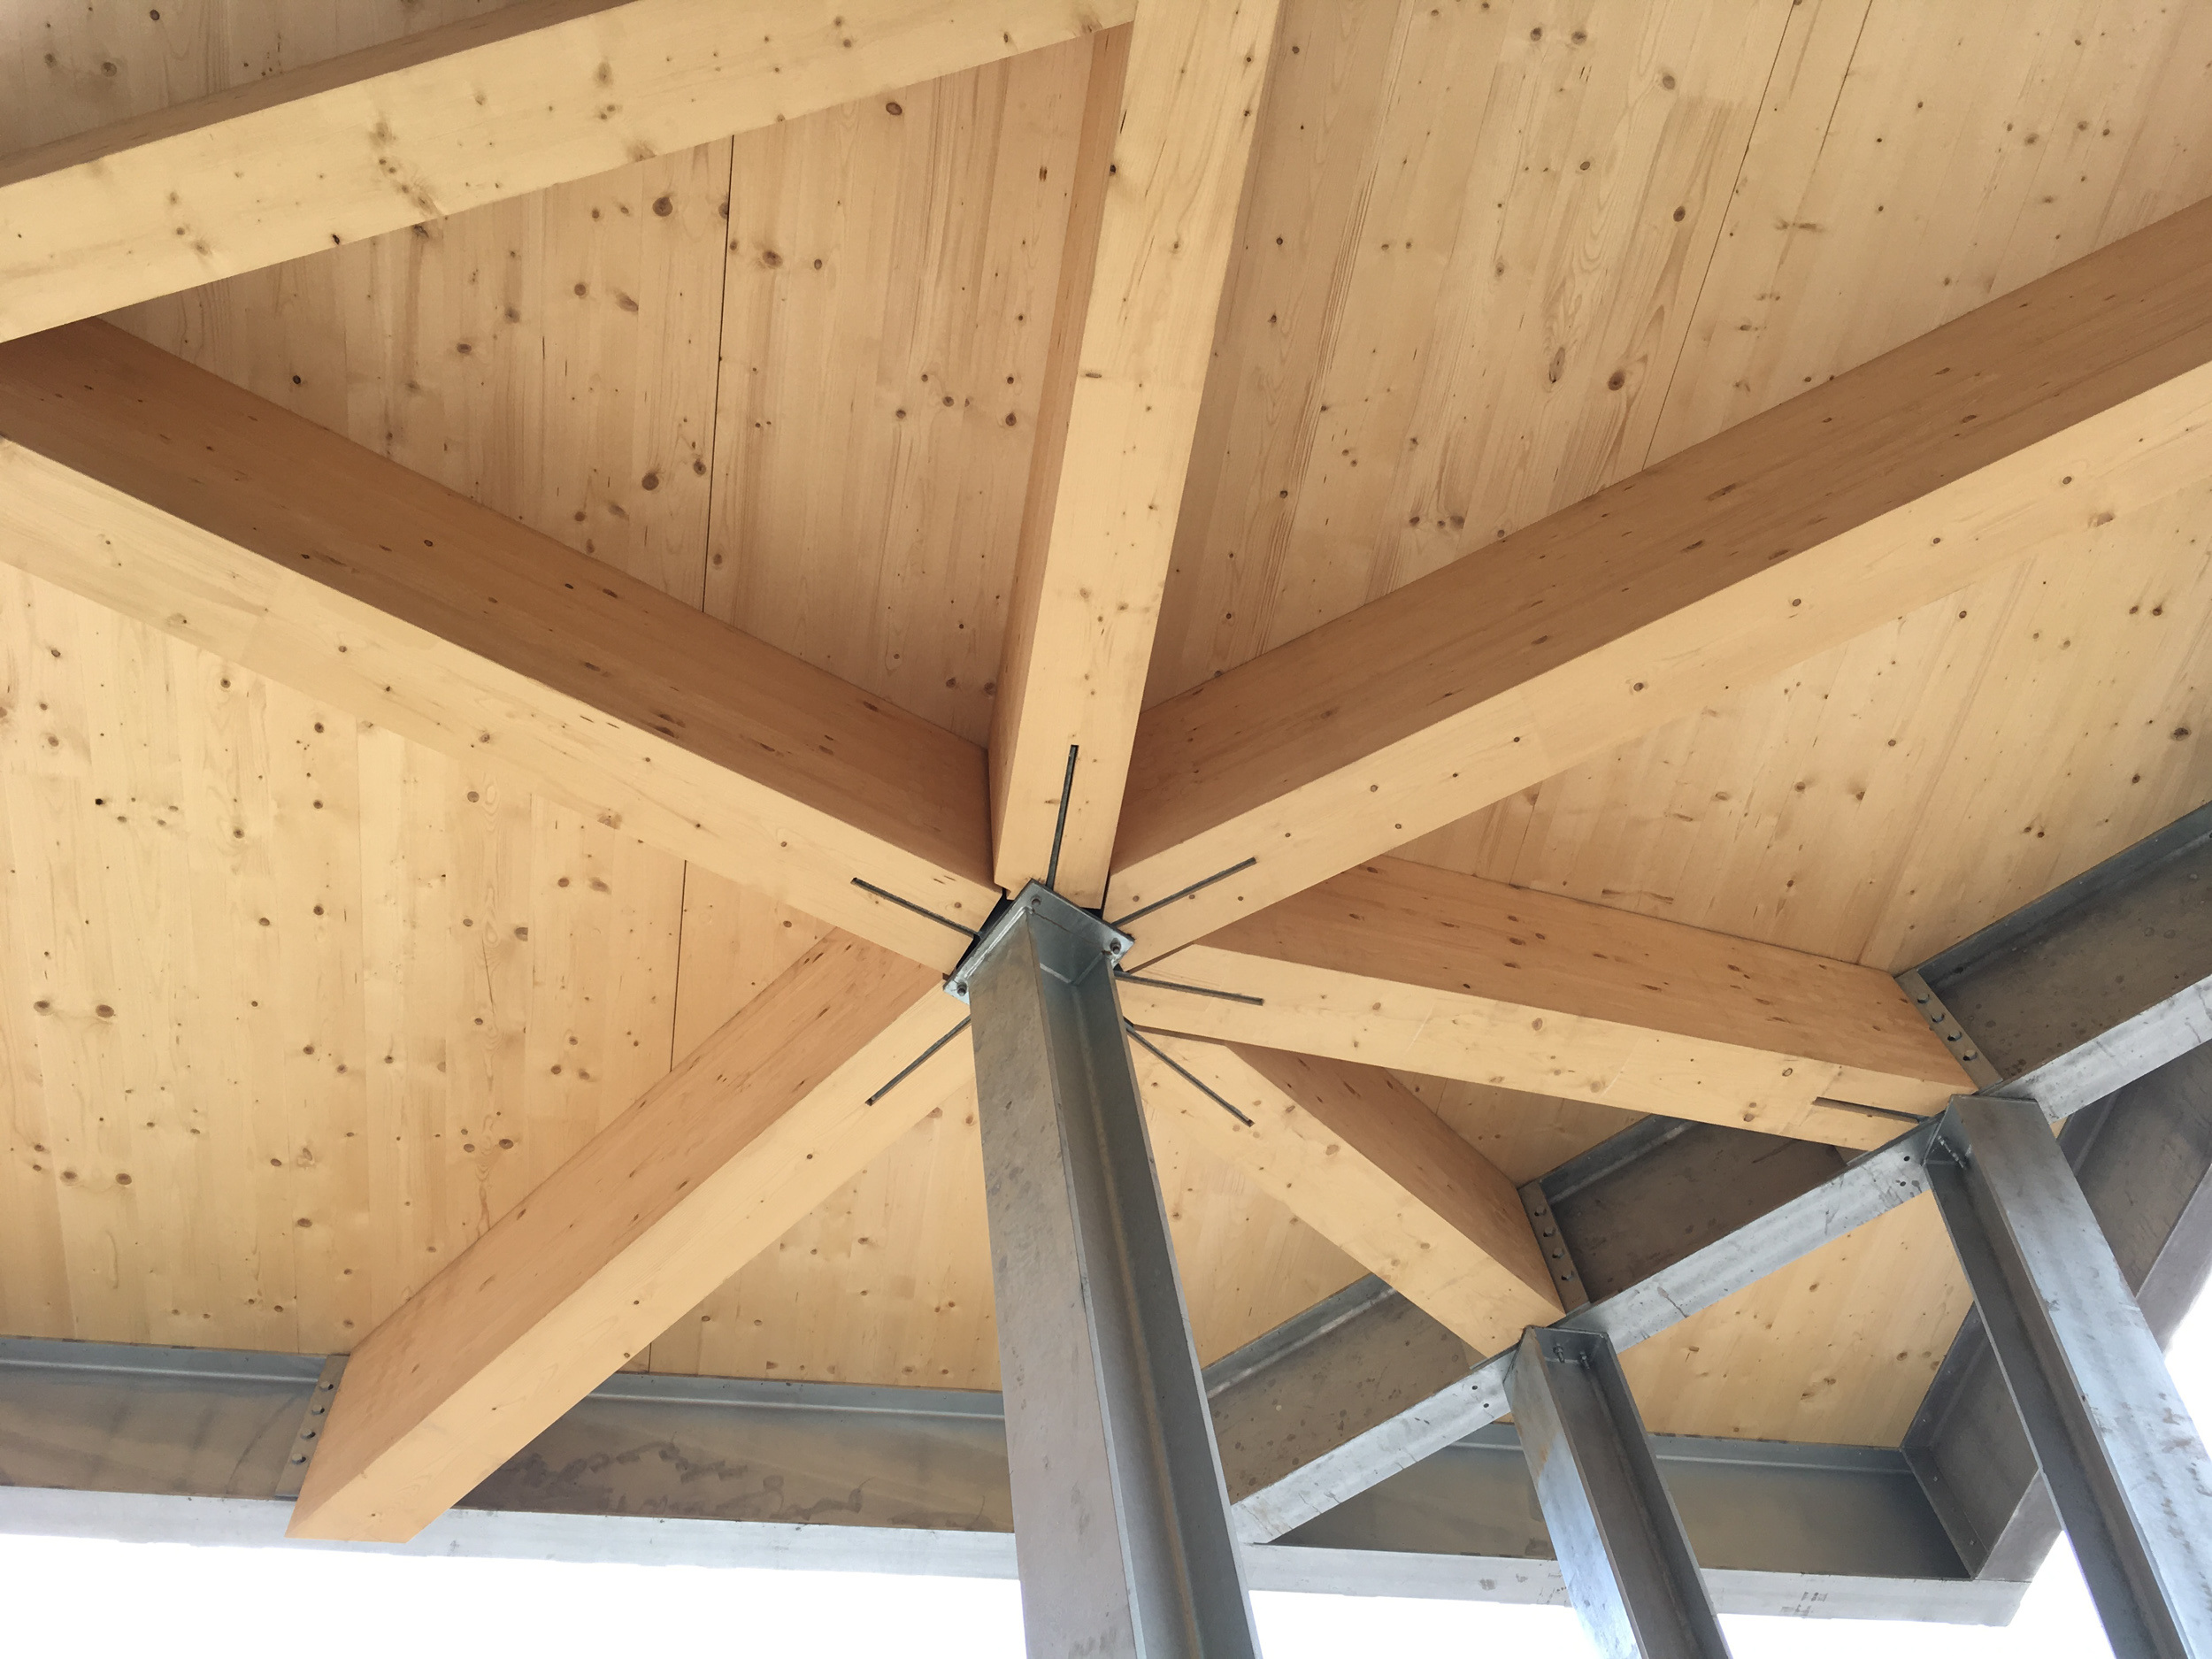 Connecting sections of timber make up a roof section in the sports learning school | CDC Studio Cambridge architects